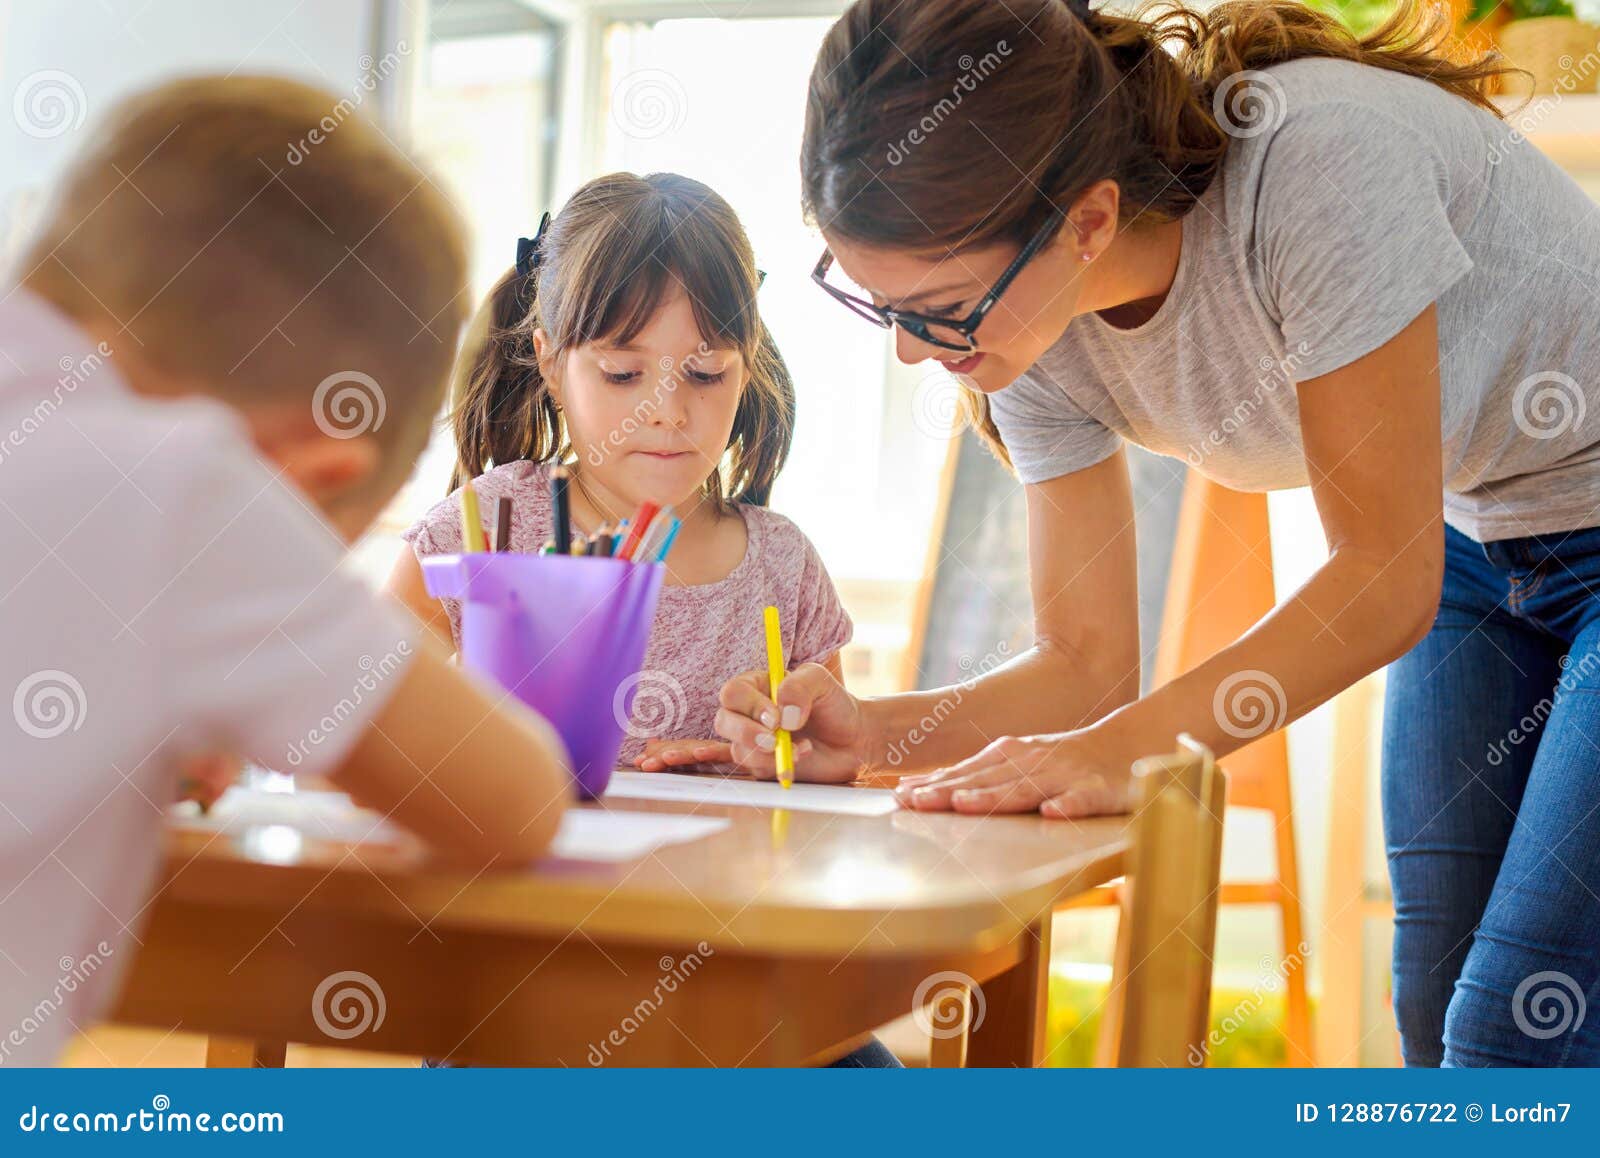 preschool teacher looking at smart child learning to write and draw